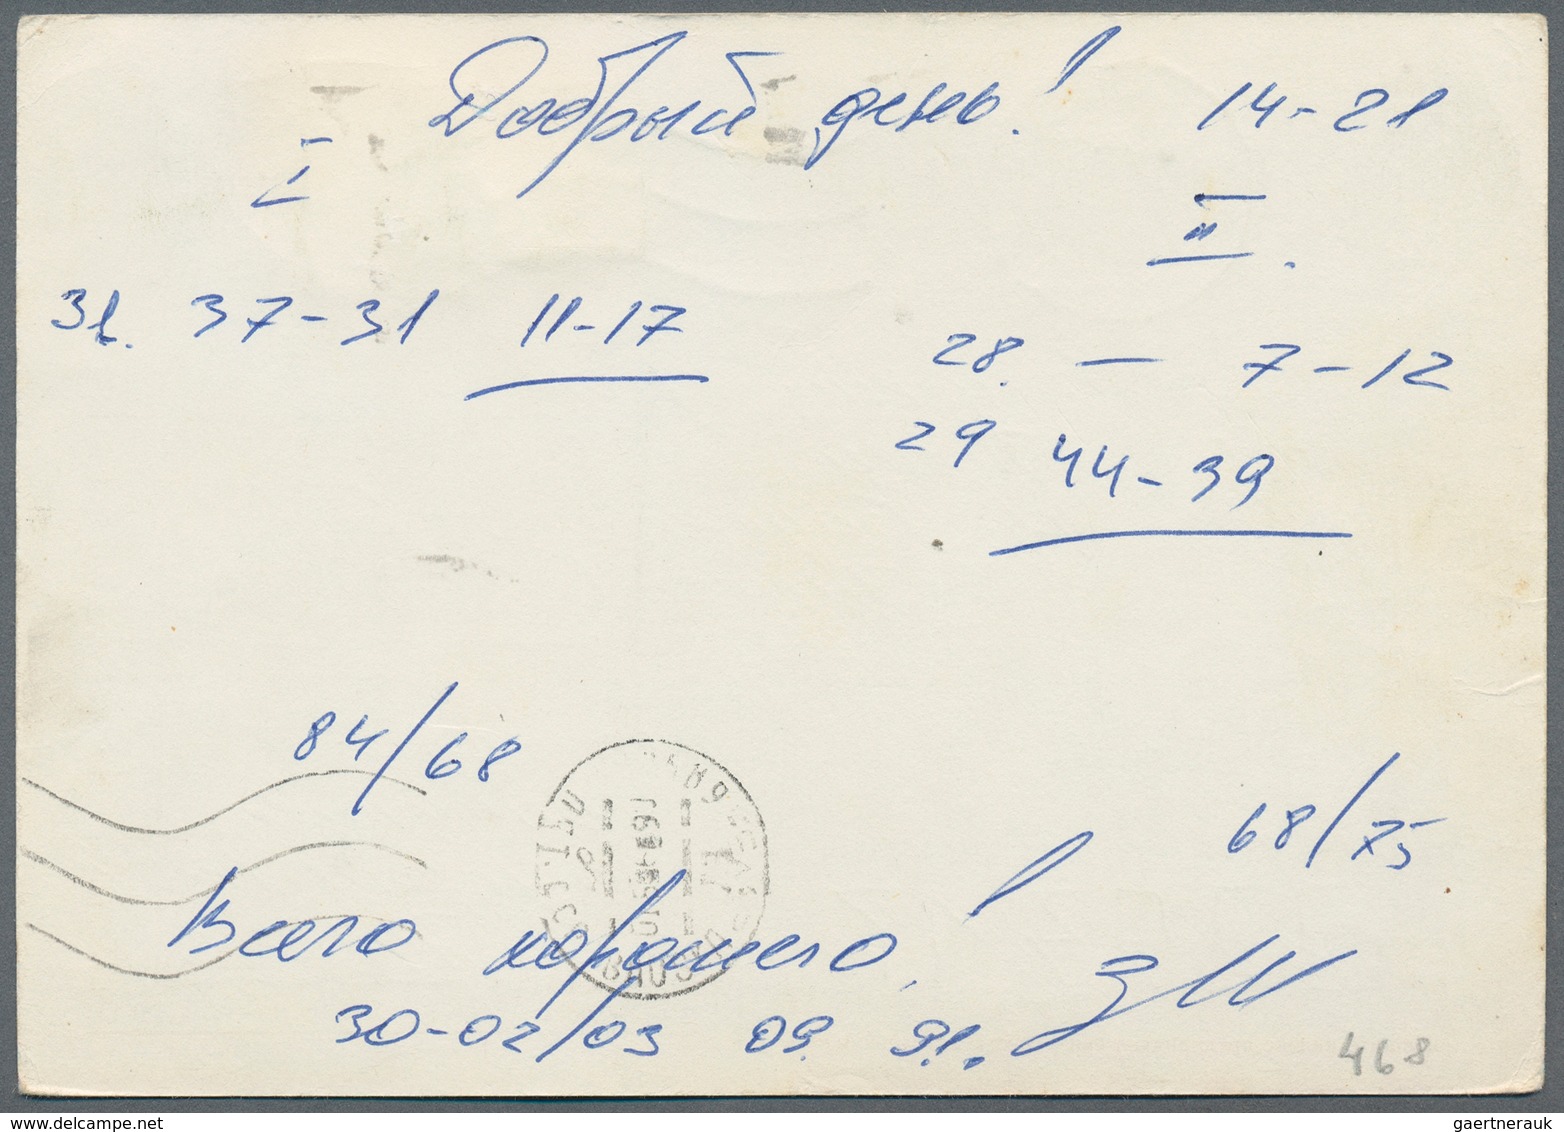 Sowjetunion - Ganzsachen: 1968/90 eight unused and used postal stationery cards with reference to th